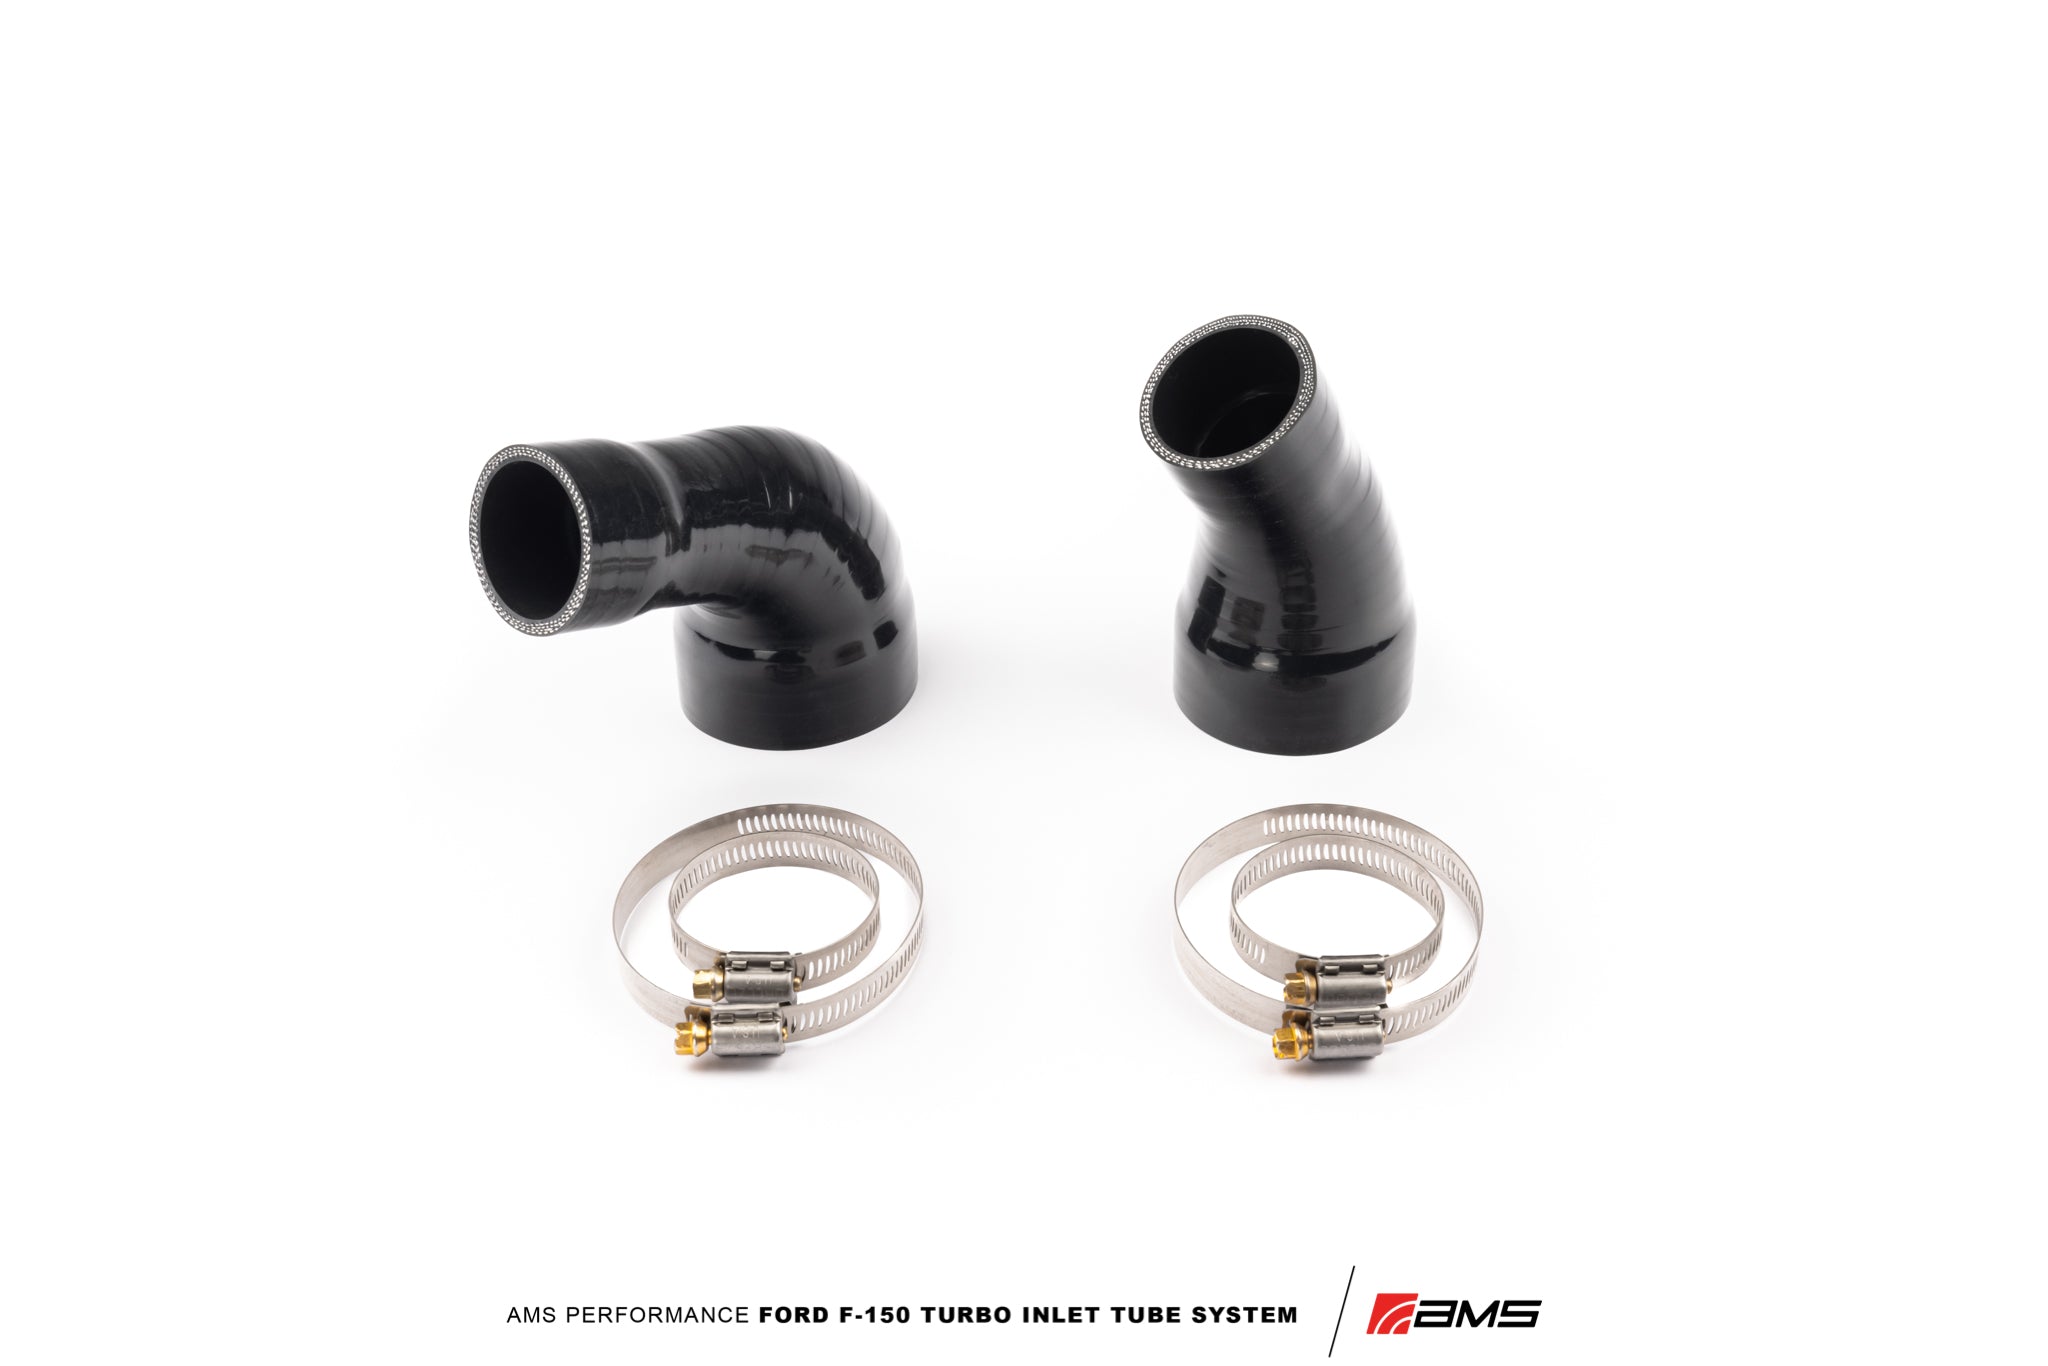 AMS PERFORMANCE 2015-2016 FORD F-150 3.5L ECOBOOST TURBO INLET TUBES